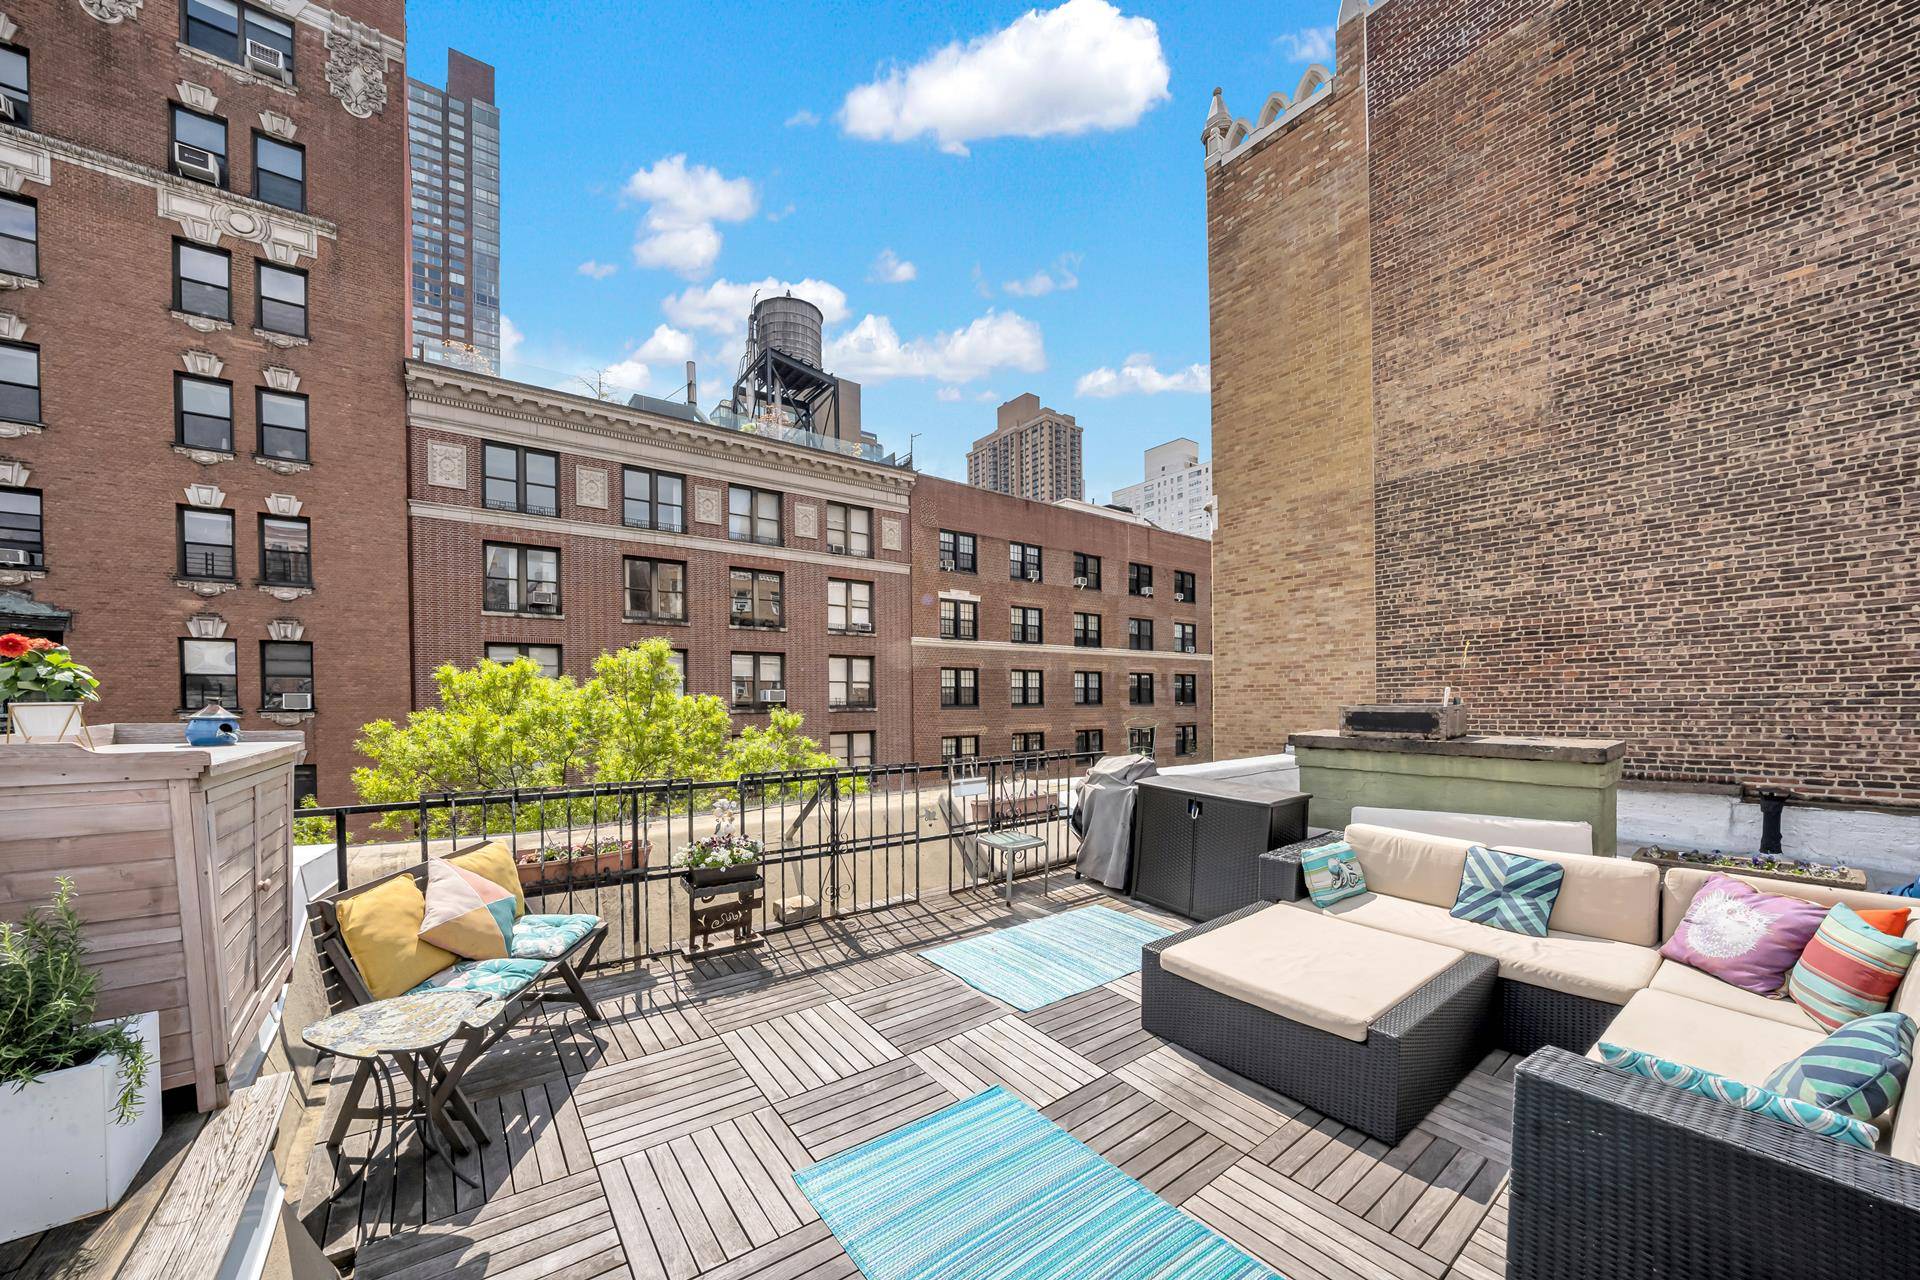 Dine al fresco and enjoy the change of seasons on your own spacious private roof deck !